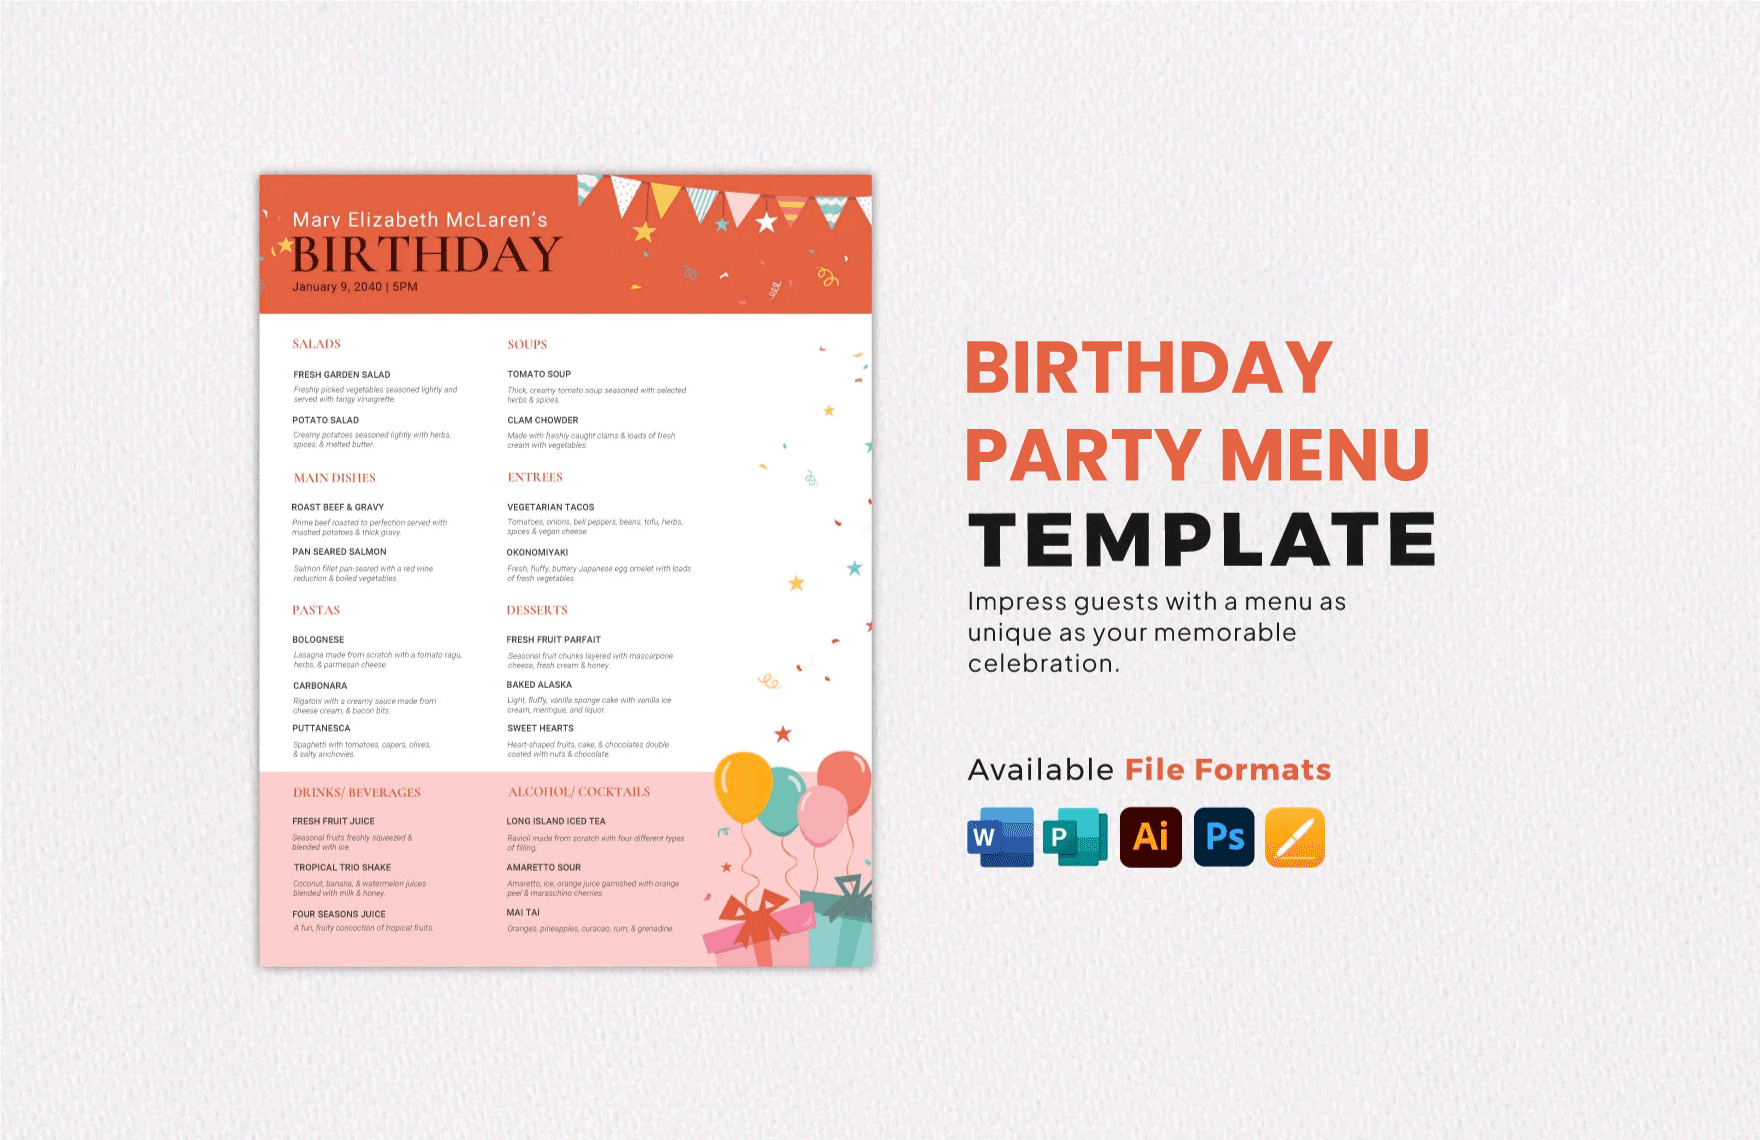 Free Birthday Party Menu Template in Word, Illustrator, PSD, Apple Pages, Publisher